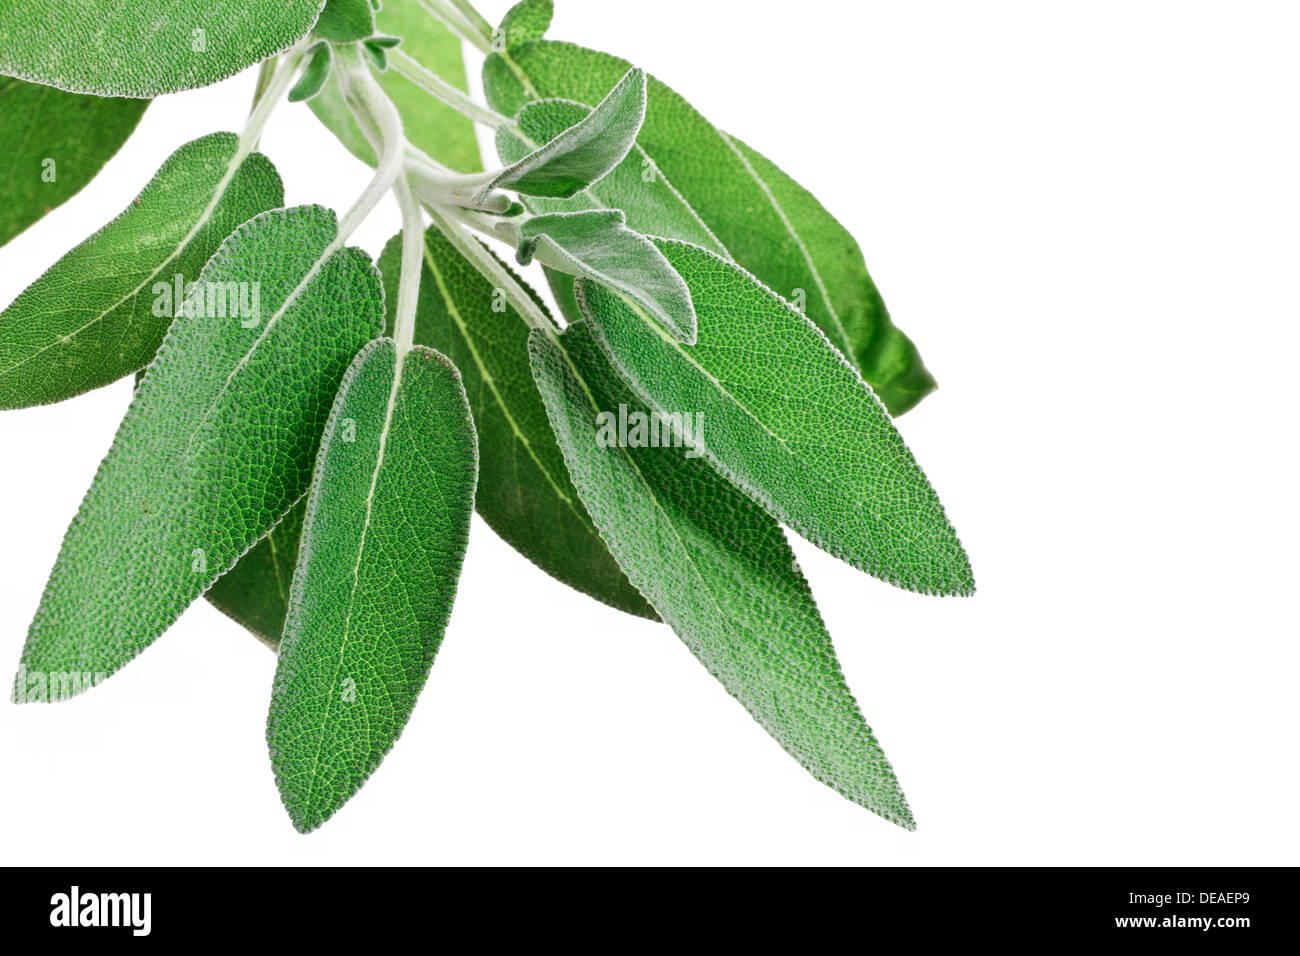 bunch of sage isolated on white background Stock Photo